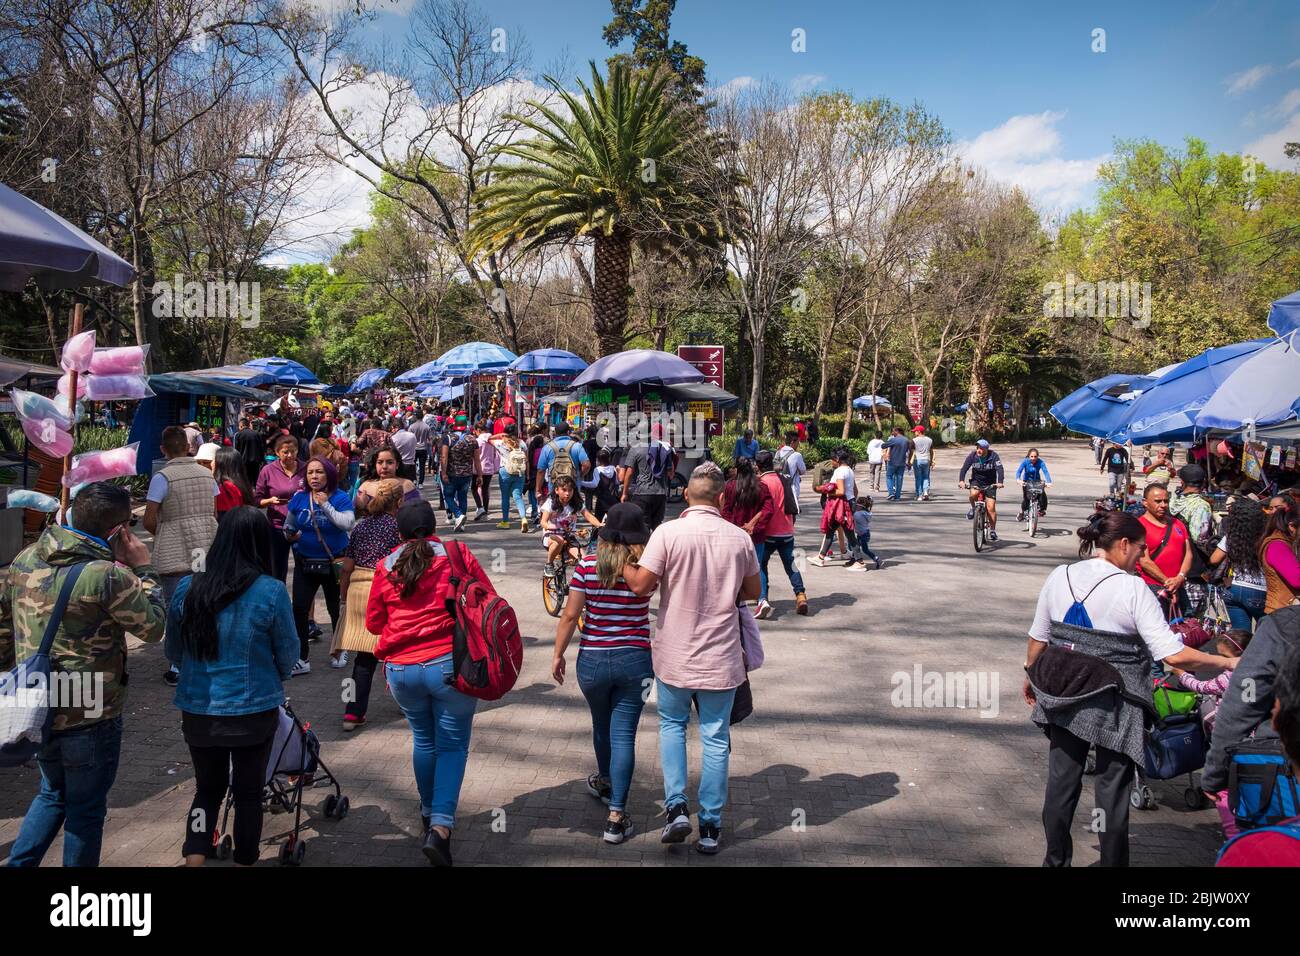 Crowds in Chapultepec Park on a weekend, Mexico City, Mexico Stock Photo